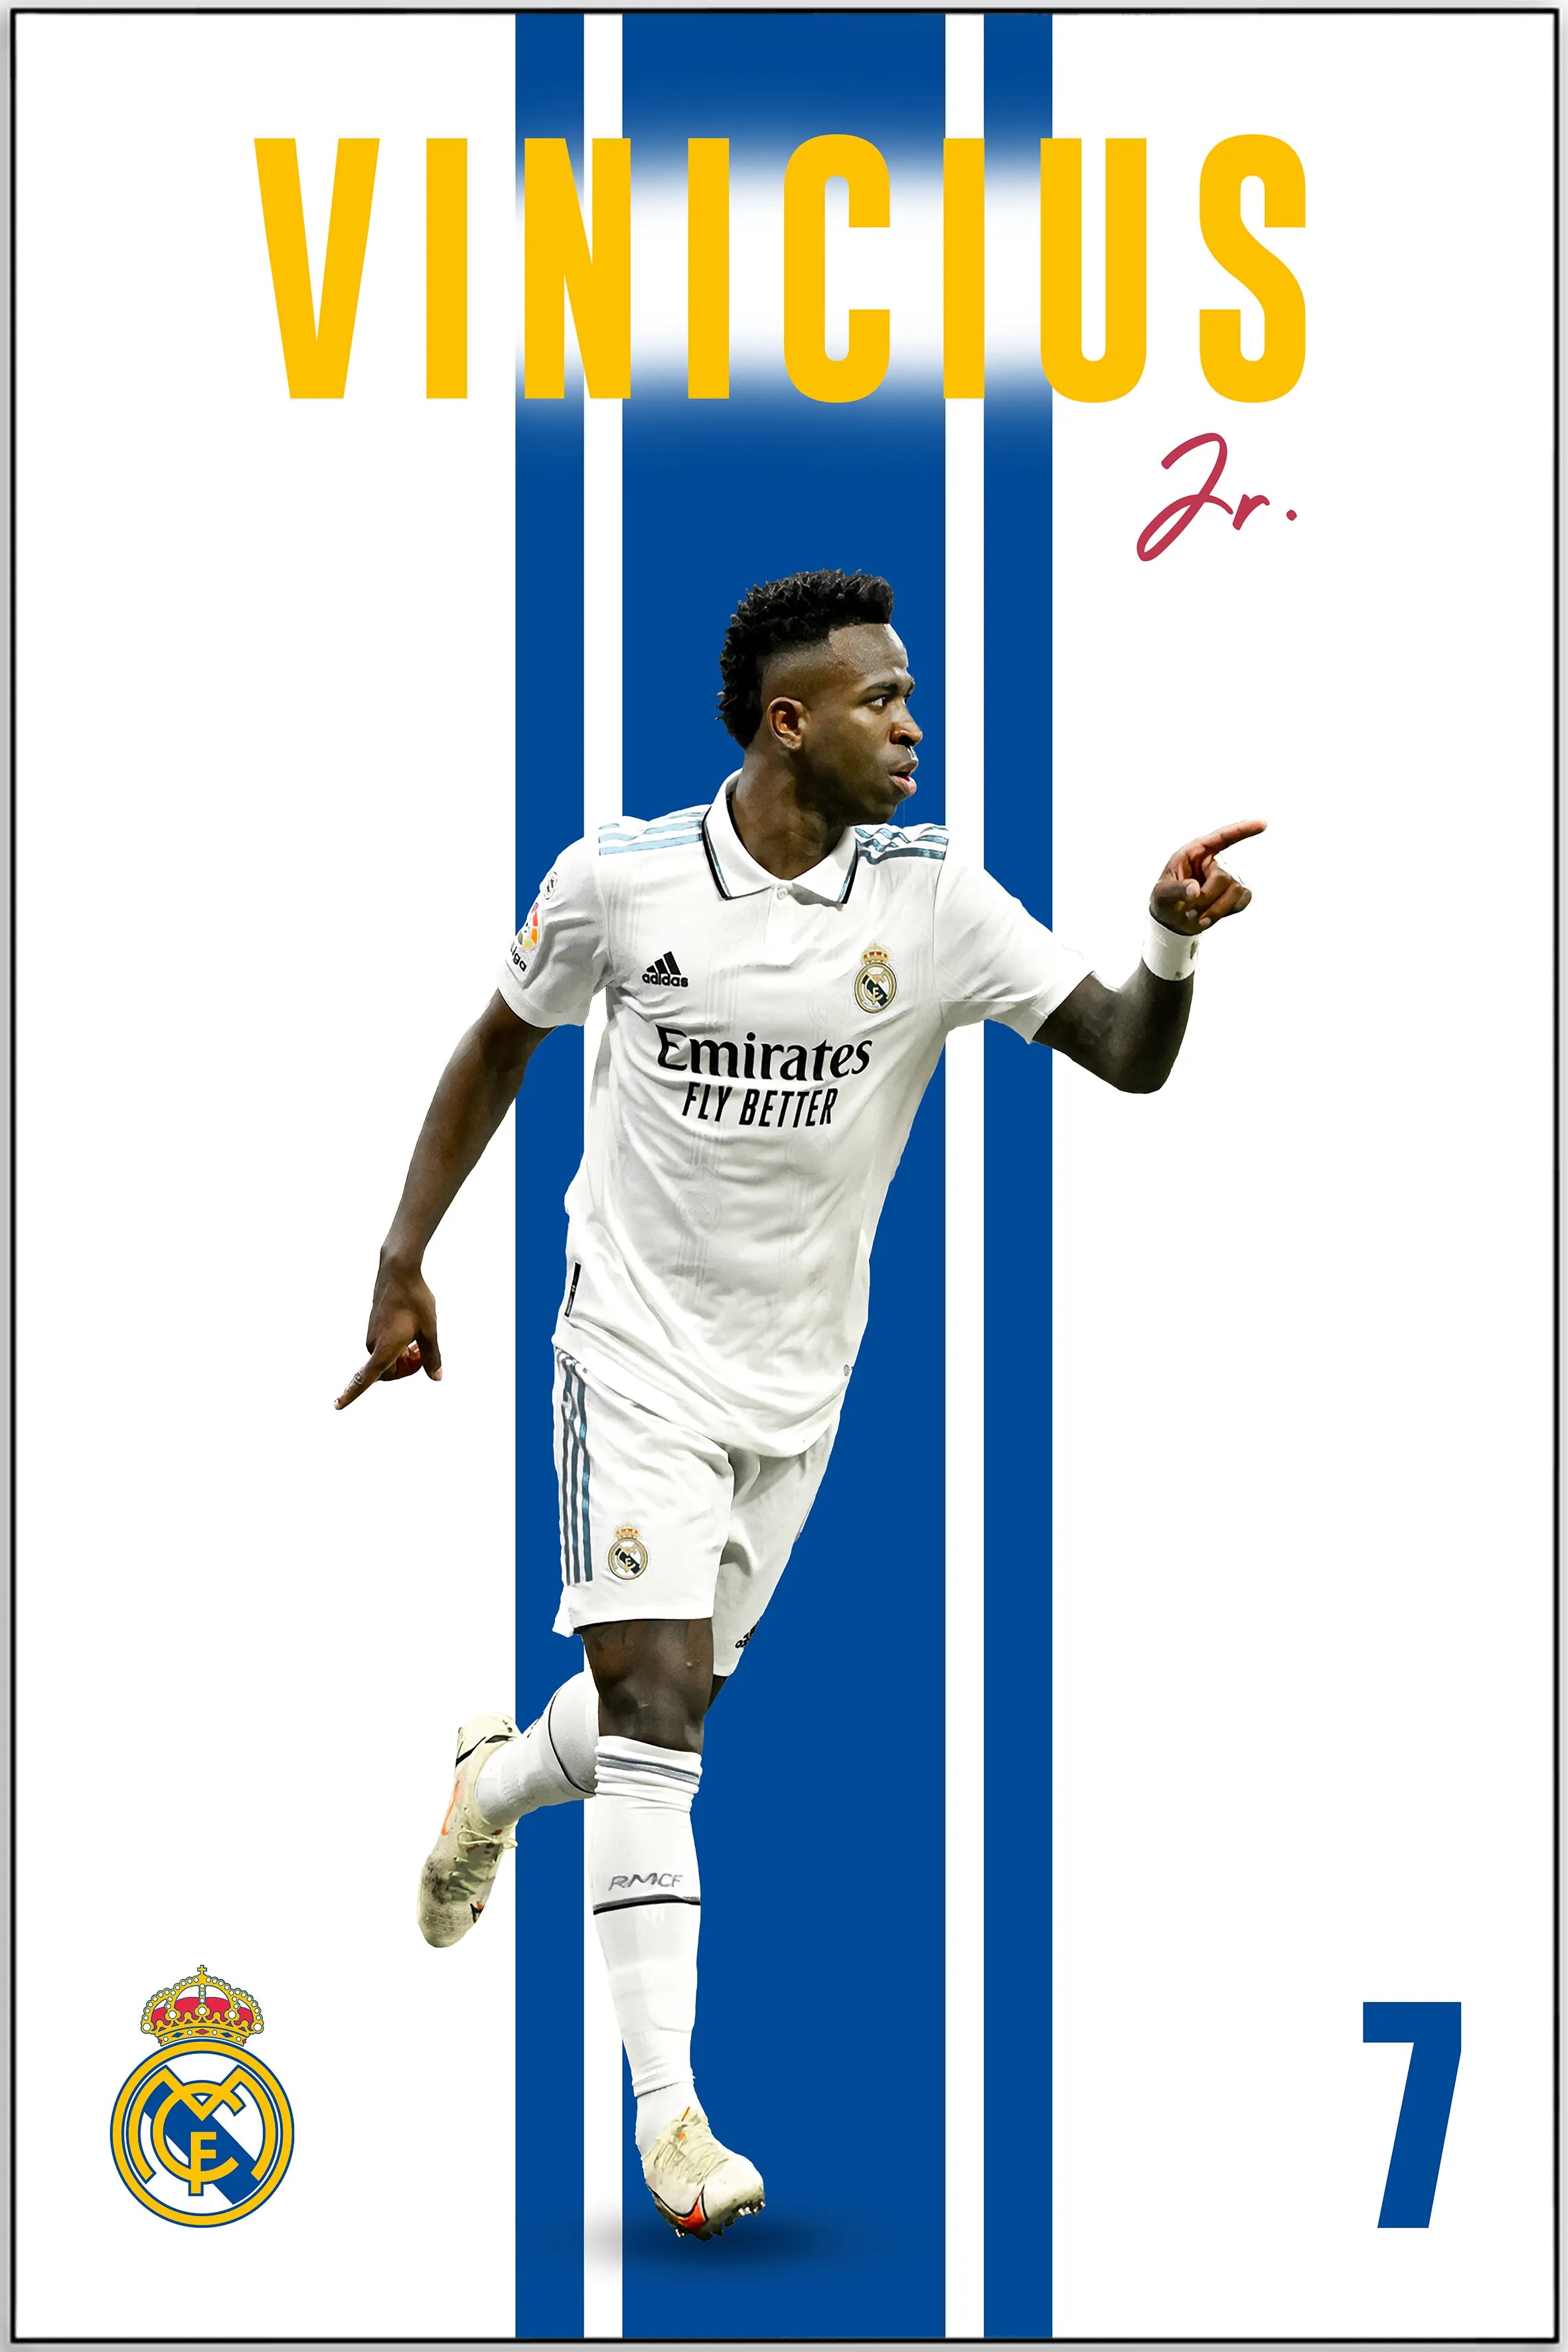 Jude Bellingham Real Madrid - Football Poster - A5/A4/A3/A2/A1/A0